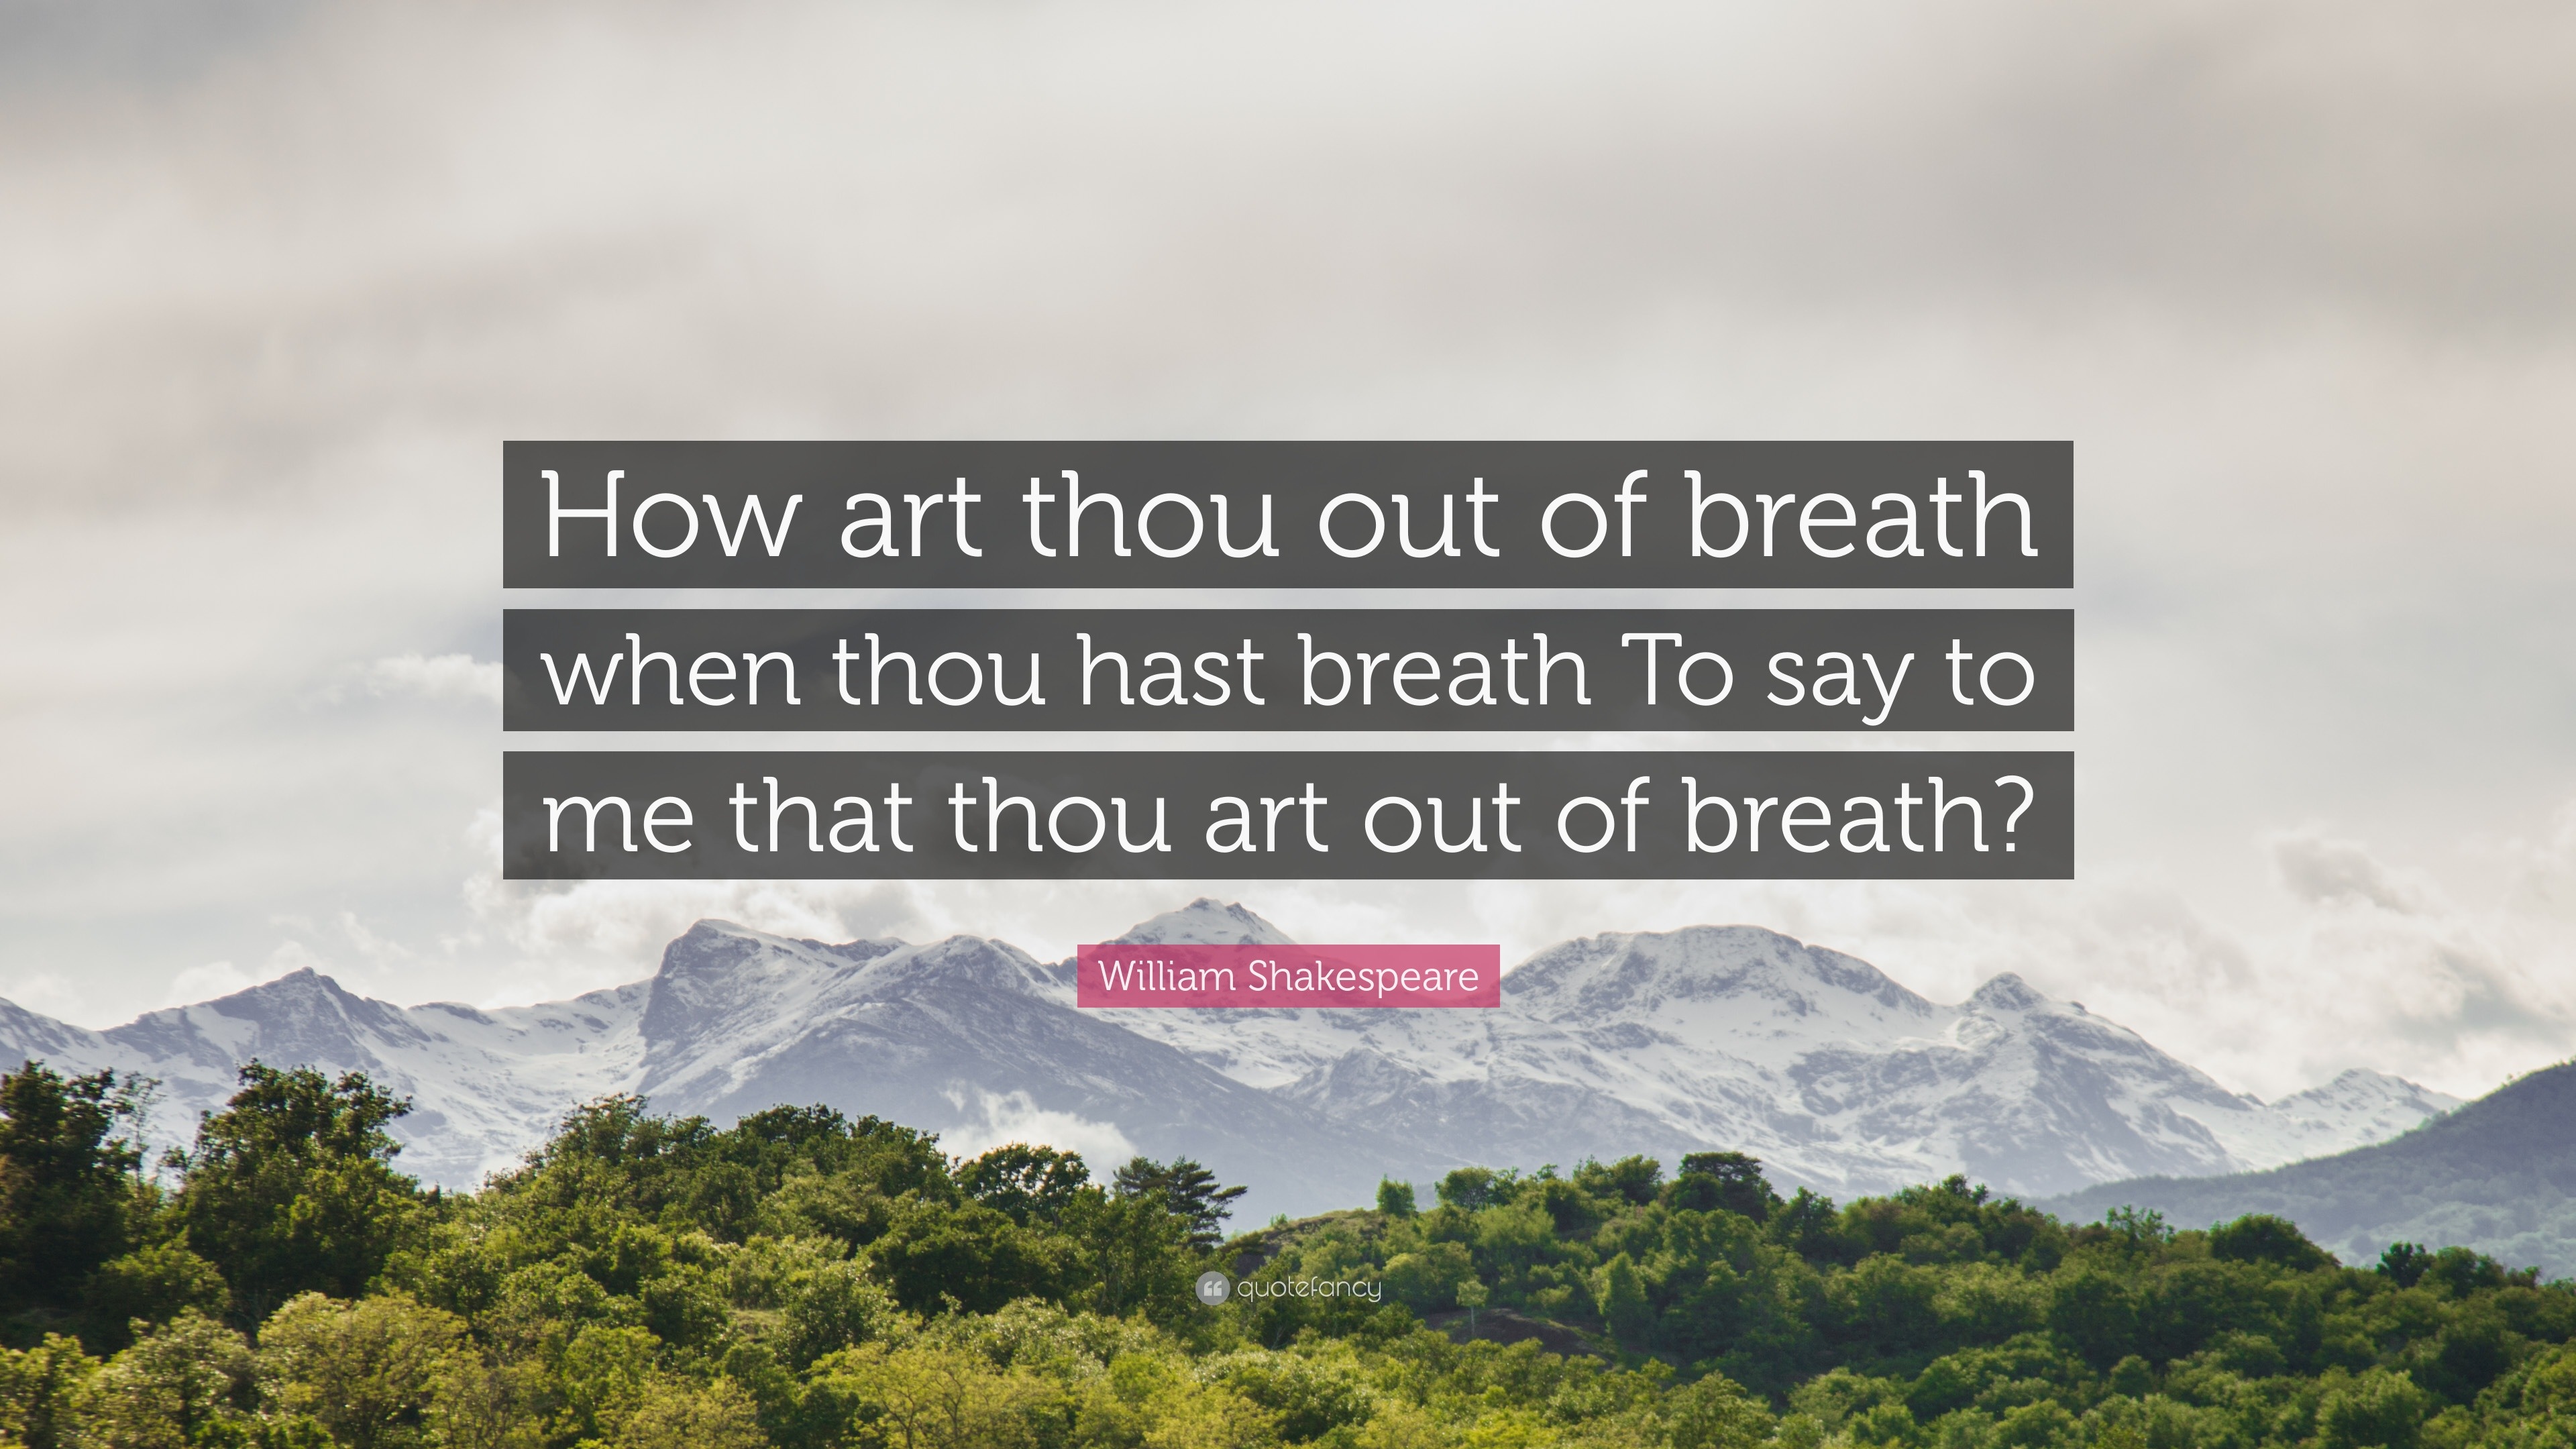 William Shakespeare Quote How Art Thou Out Of Breath When Thou Hast Breath To Say To